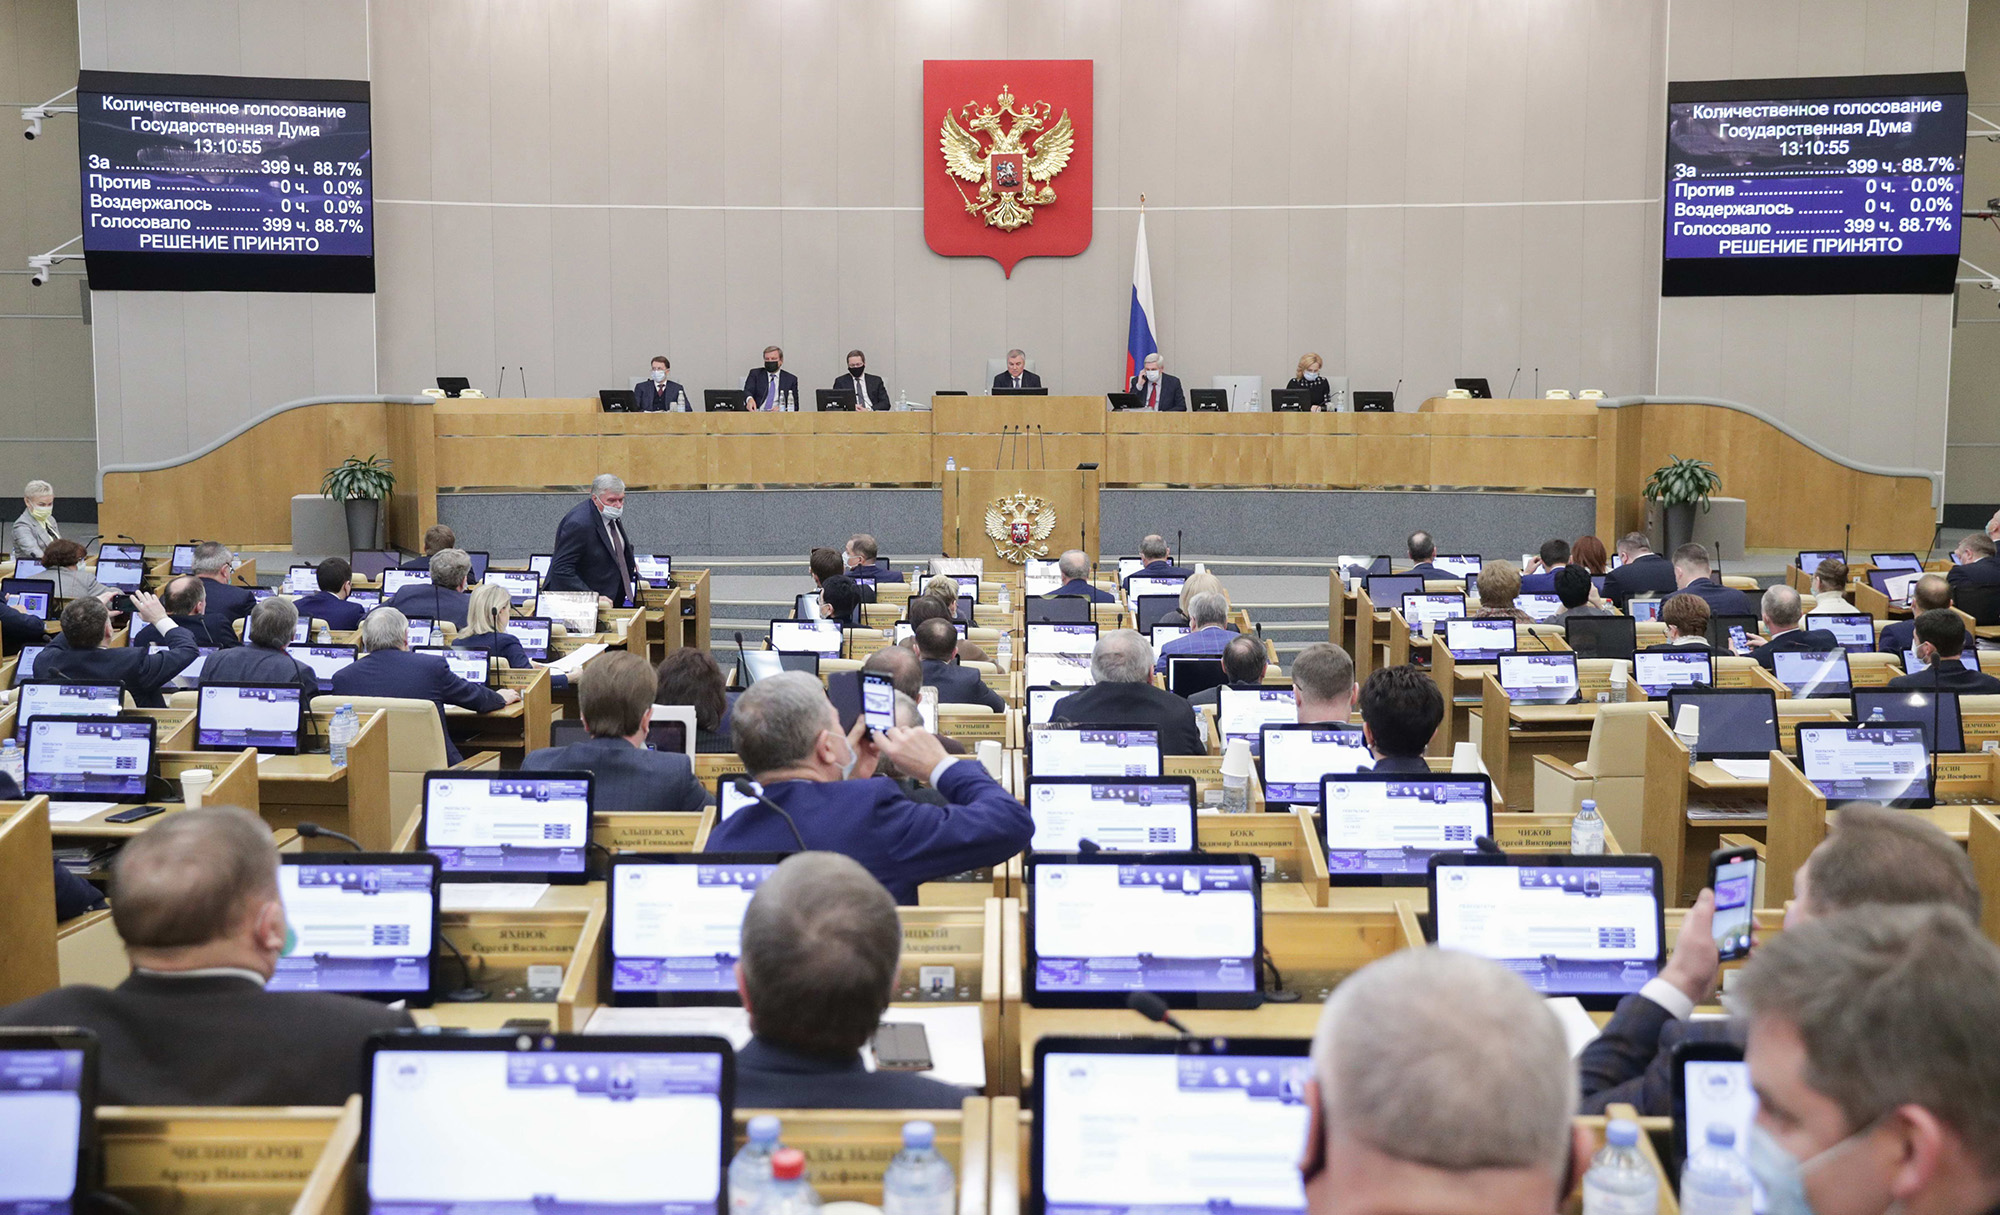 Deputies attend a session at the State Duma, the Lower House of the Russian Parliament in Moscow, Russia, on January 27, 2021. Both houses of parliament voted unanimously to extend a new START treaty for five years, a fast-track move that comes days before the last remaining U.S.-Russian arms control pact is due to expire. 